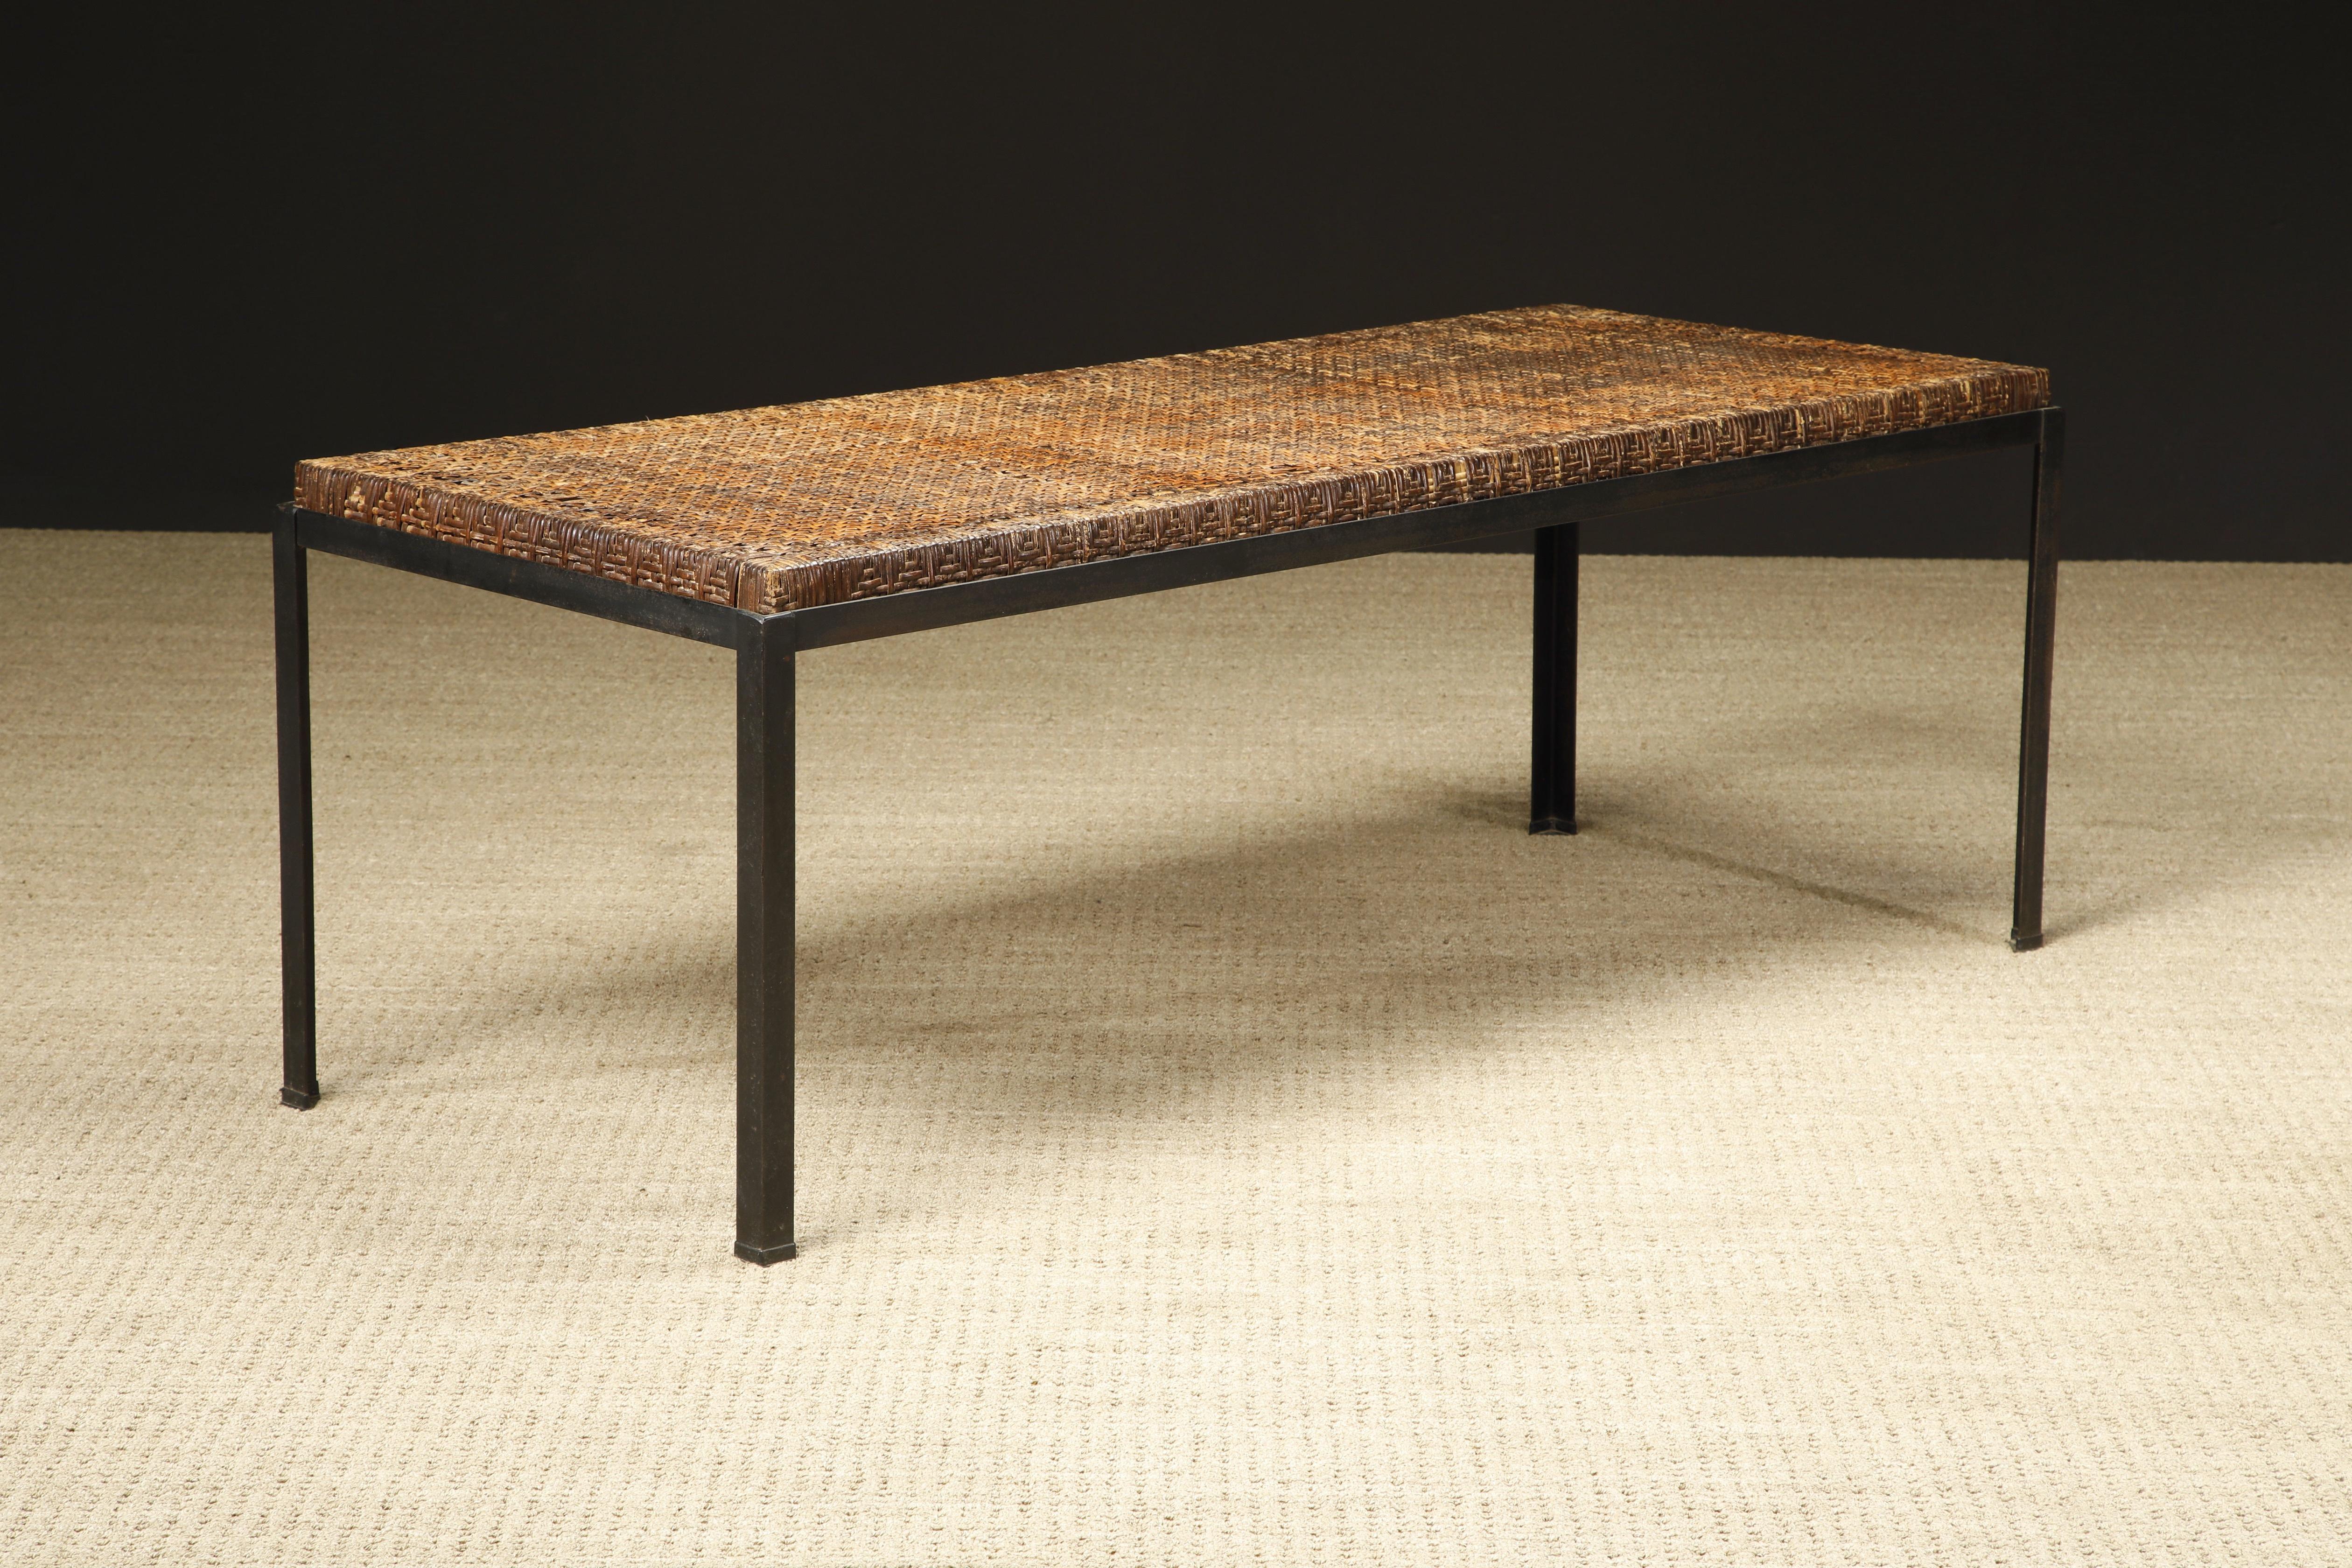 Caned Dining Table by Danny Ho Fong for Tropi-cal in Iron and Rattan, c 1960s In Good Condition For Sale In Los Angeles, CA